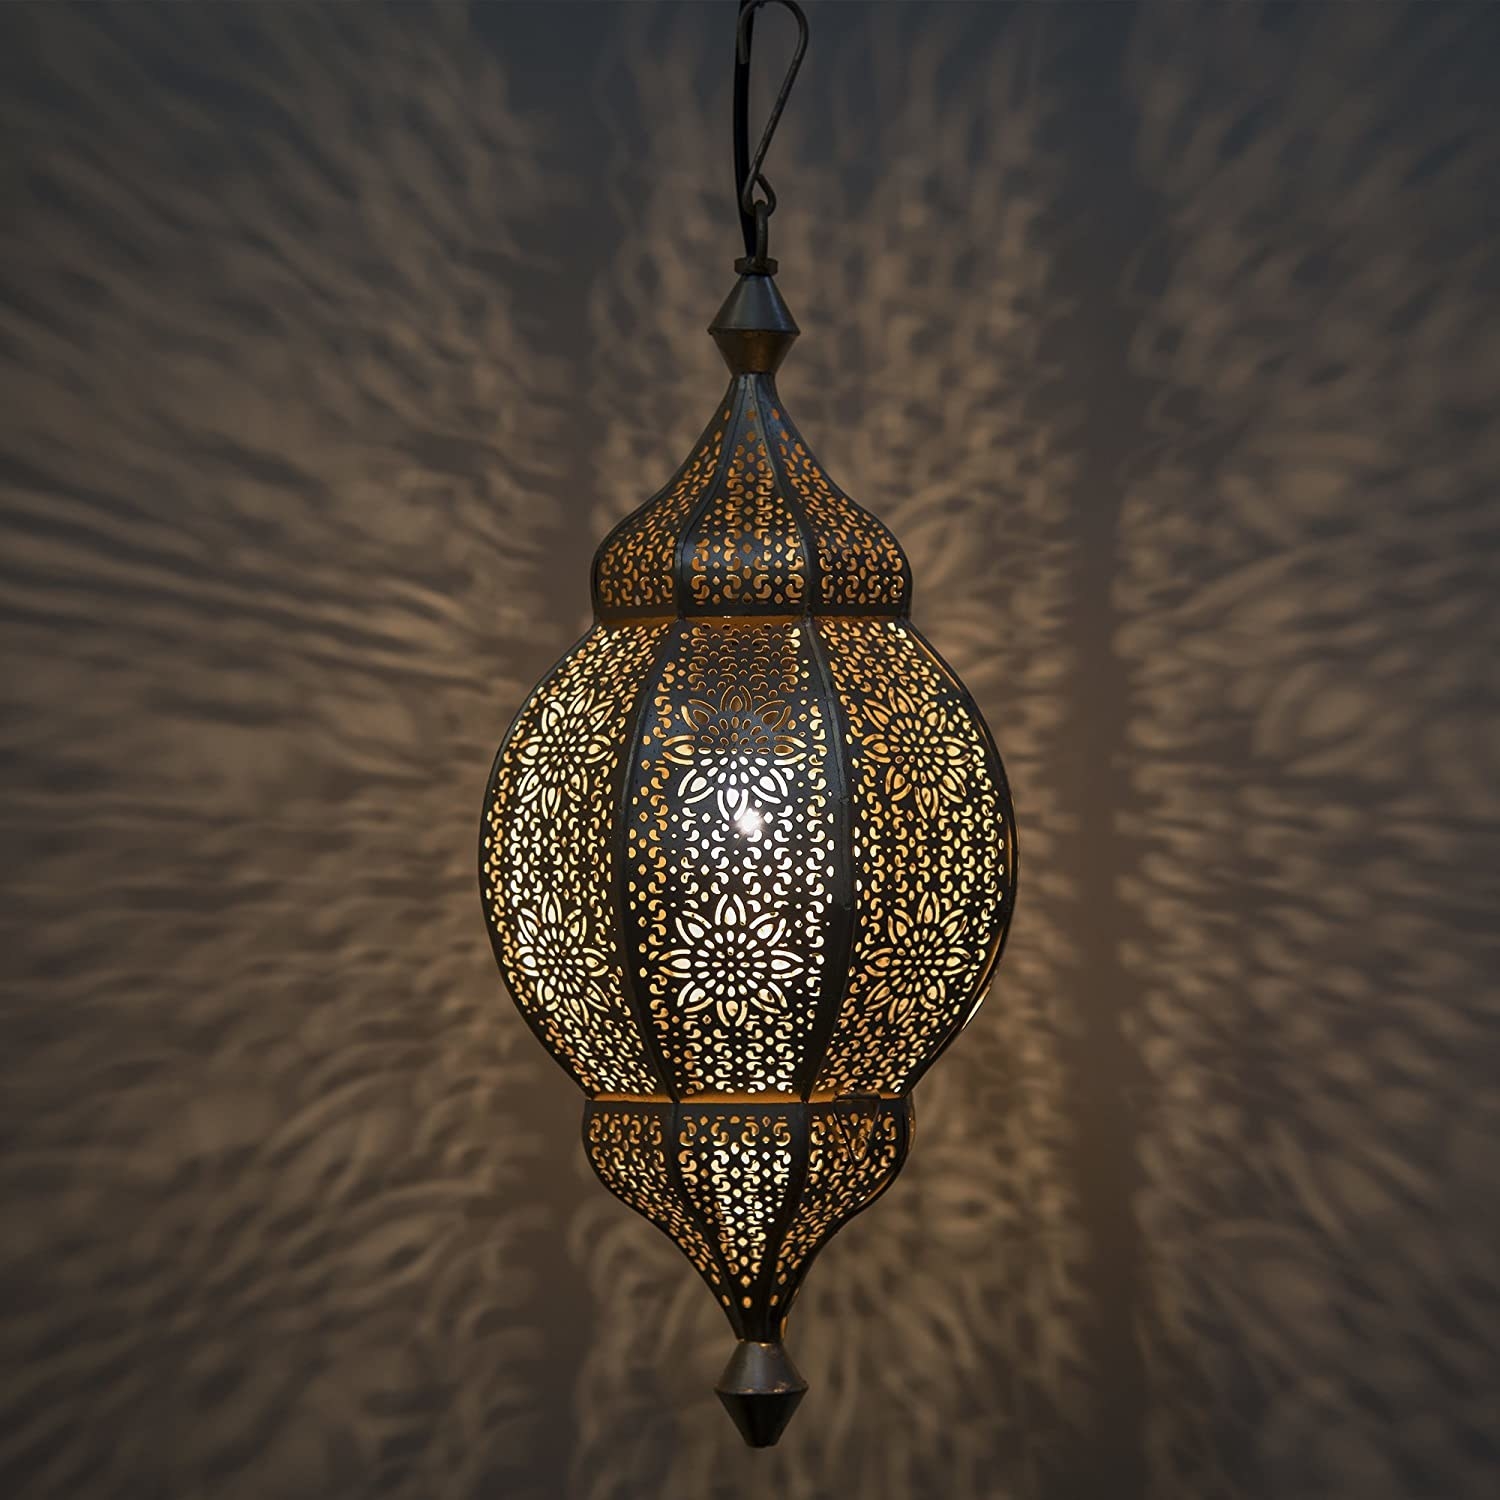 A Morrocan lamp casting shadows on the wall